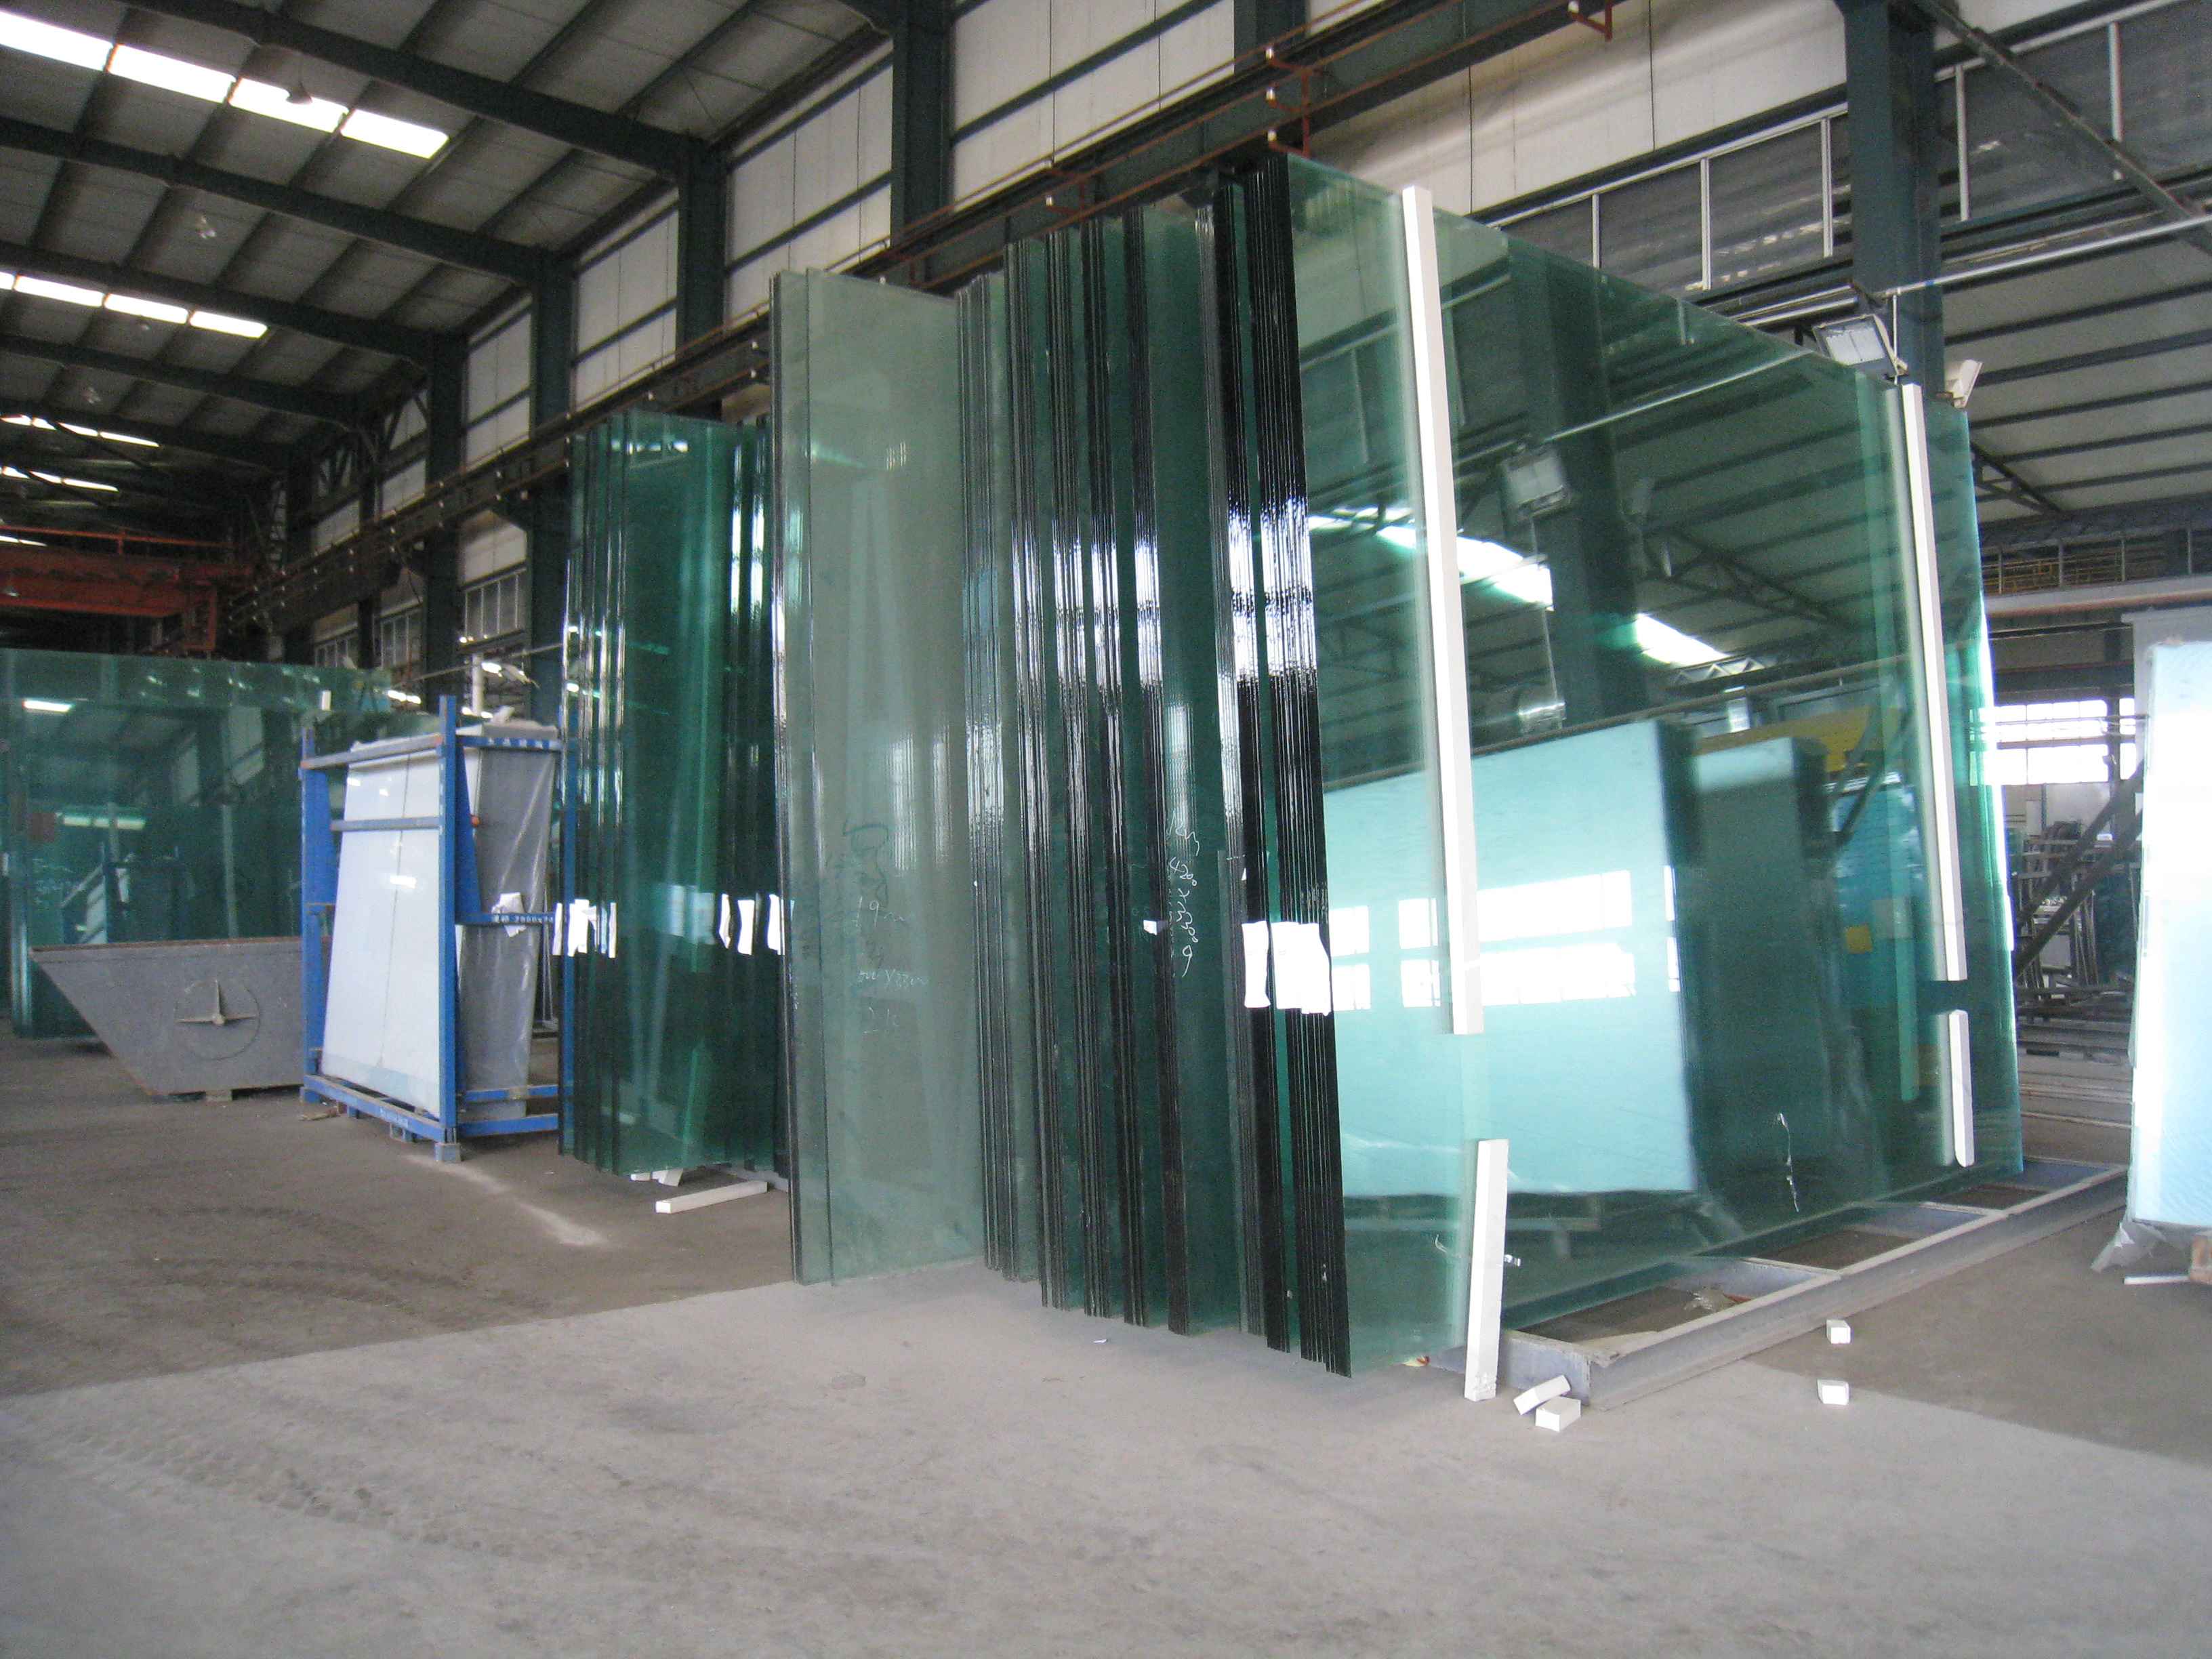 What Is The Development History Of Glass?